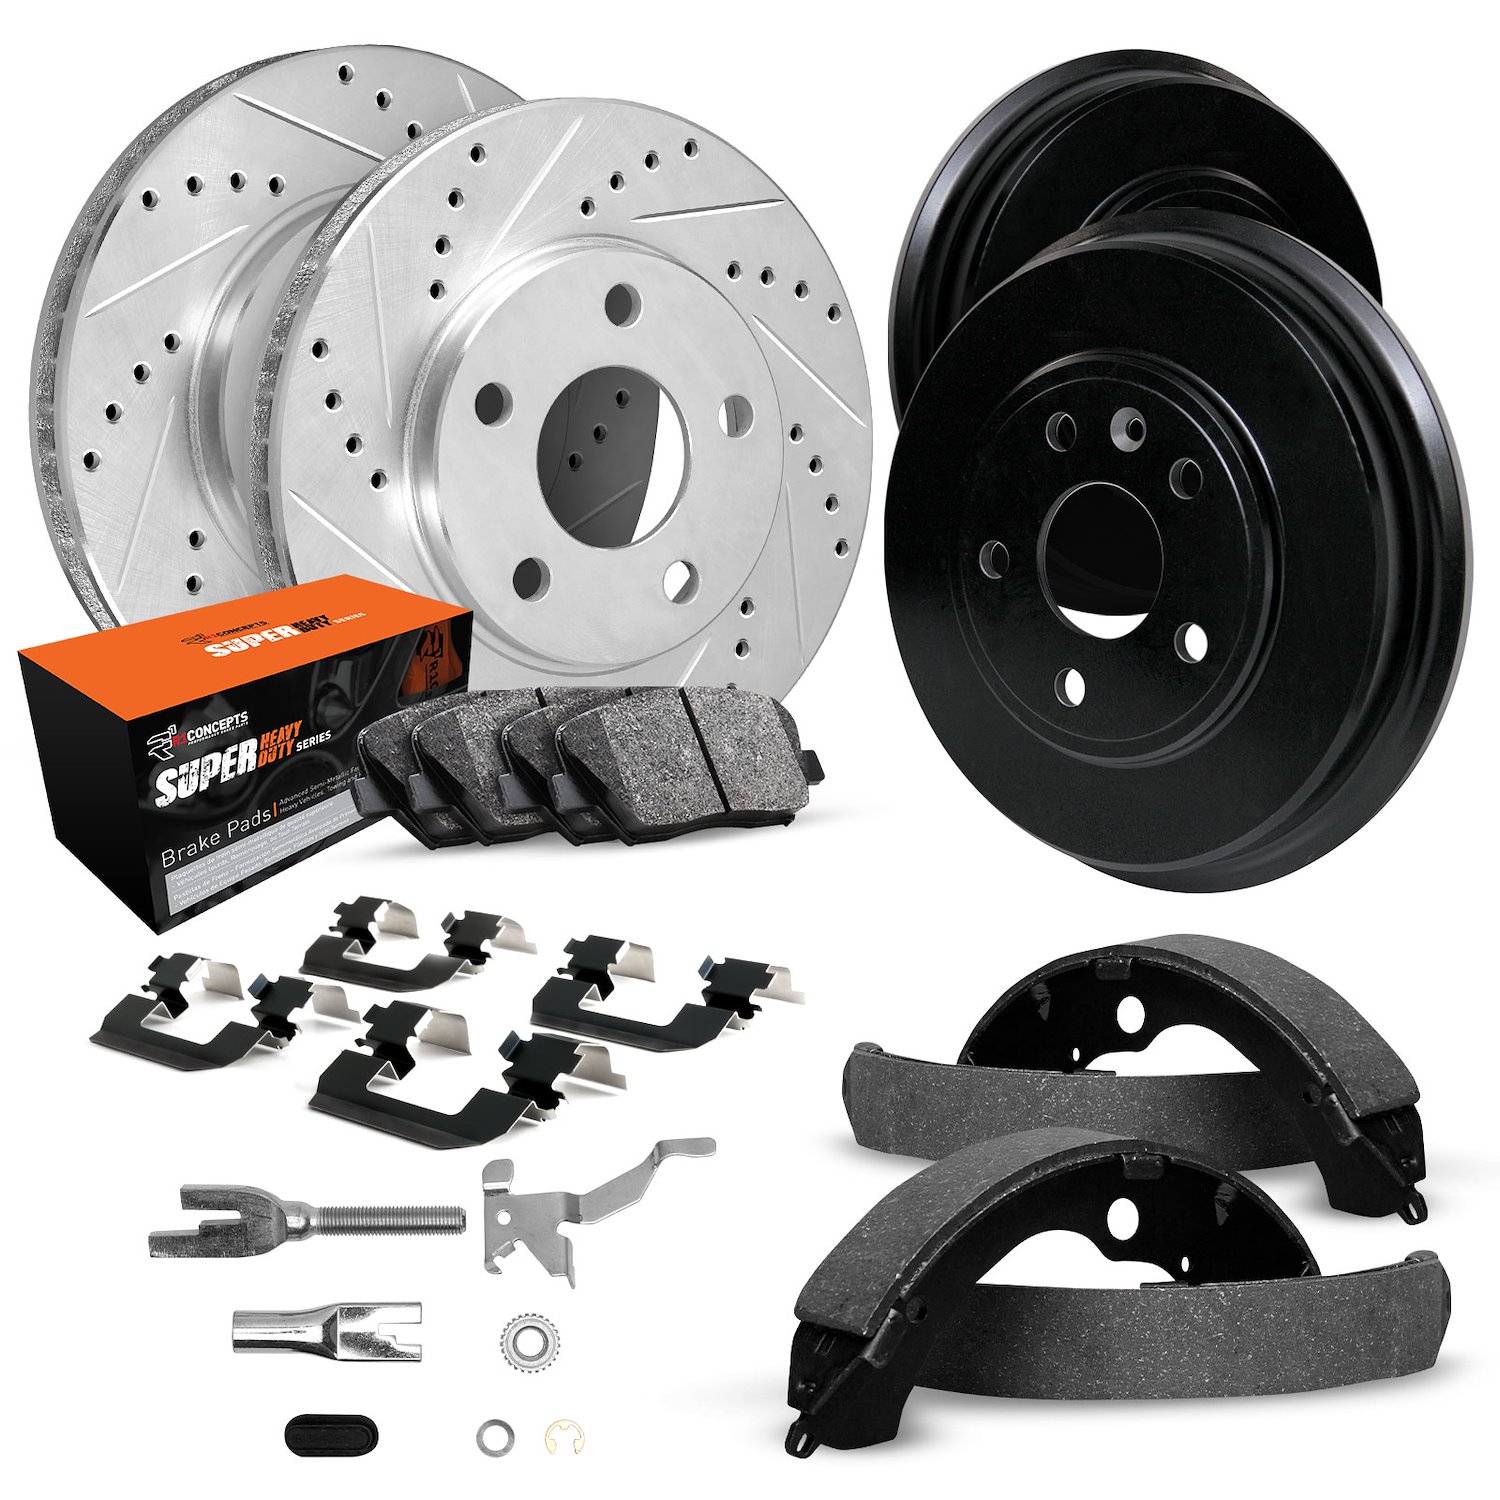 E-Line Drilled/Slotted Silver Rotor & Drum Set w/Super-Duty Pads, Shoes/Hardware/Adjusters, 1978-1978 Mopar